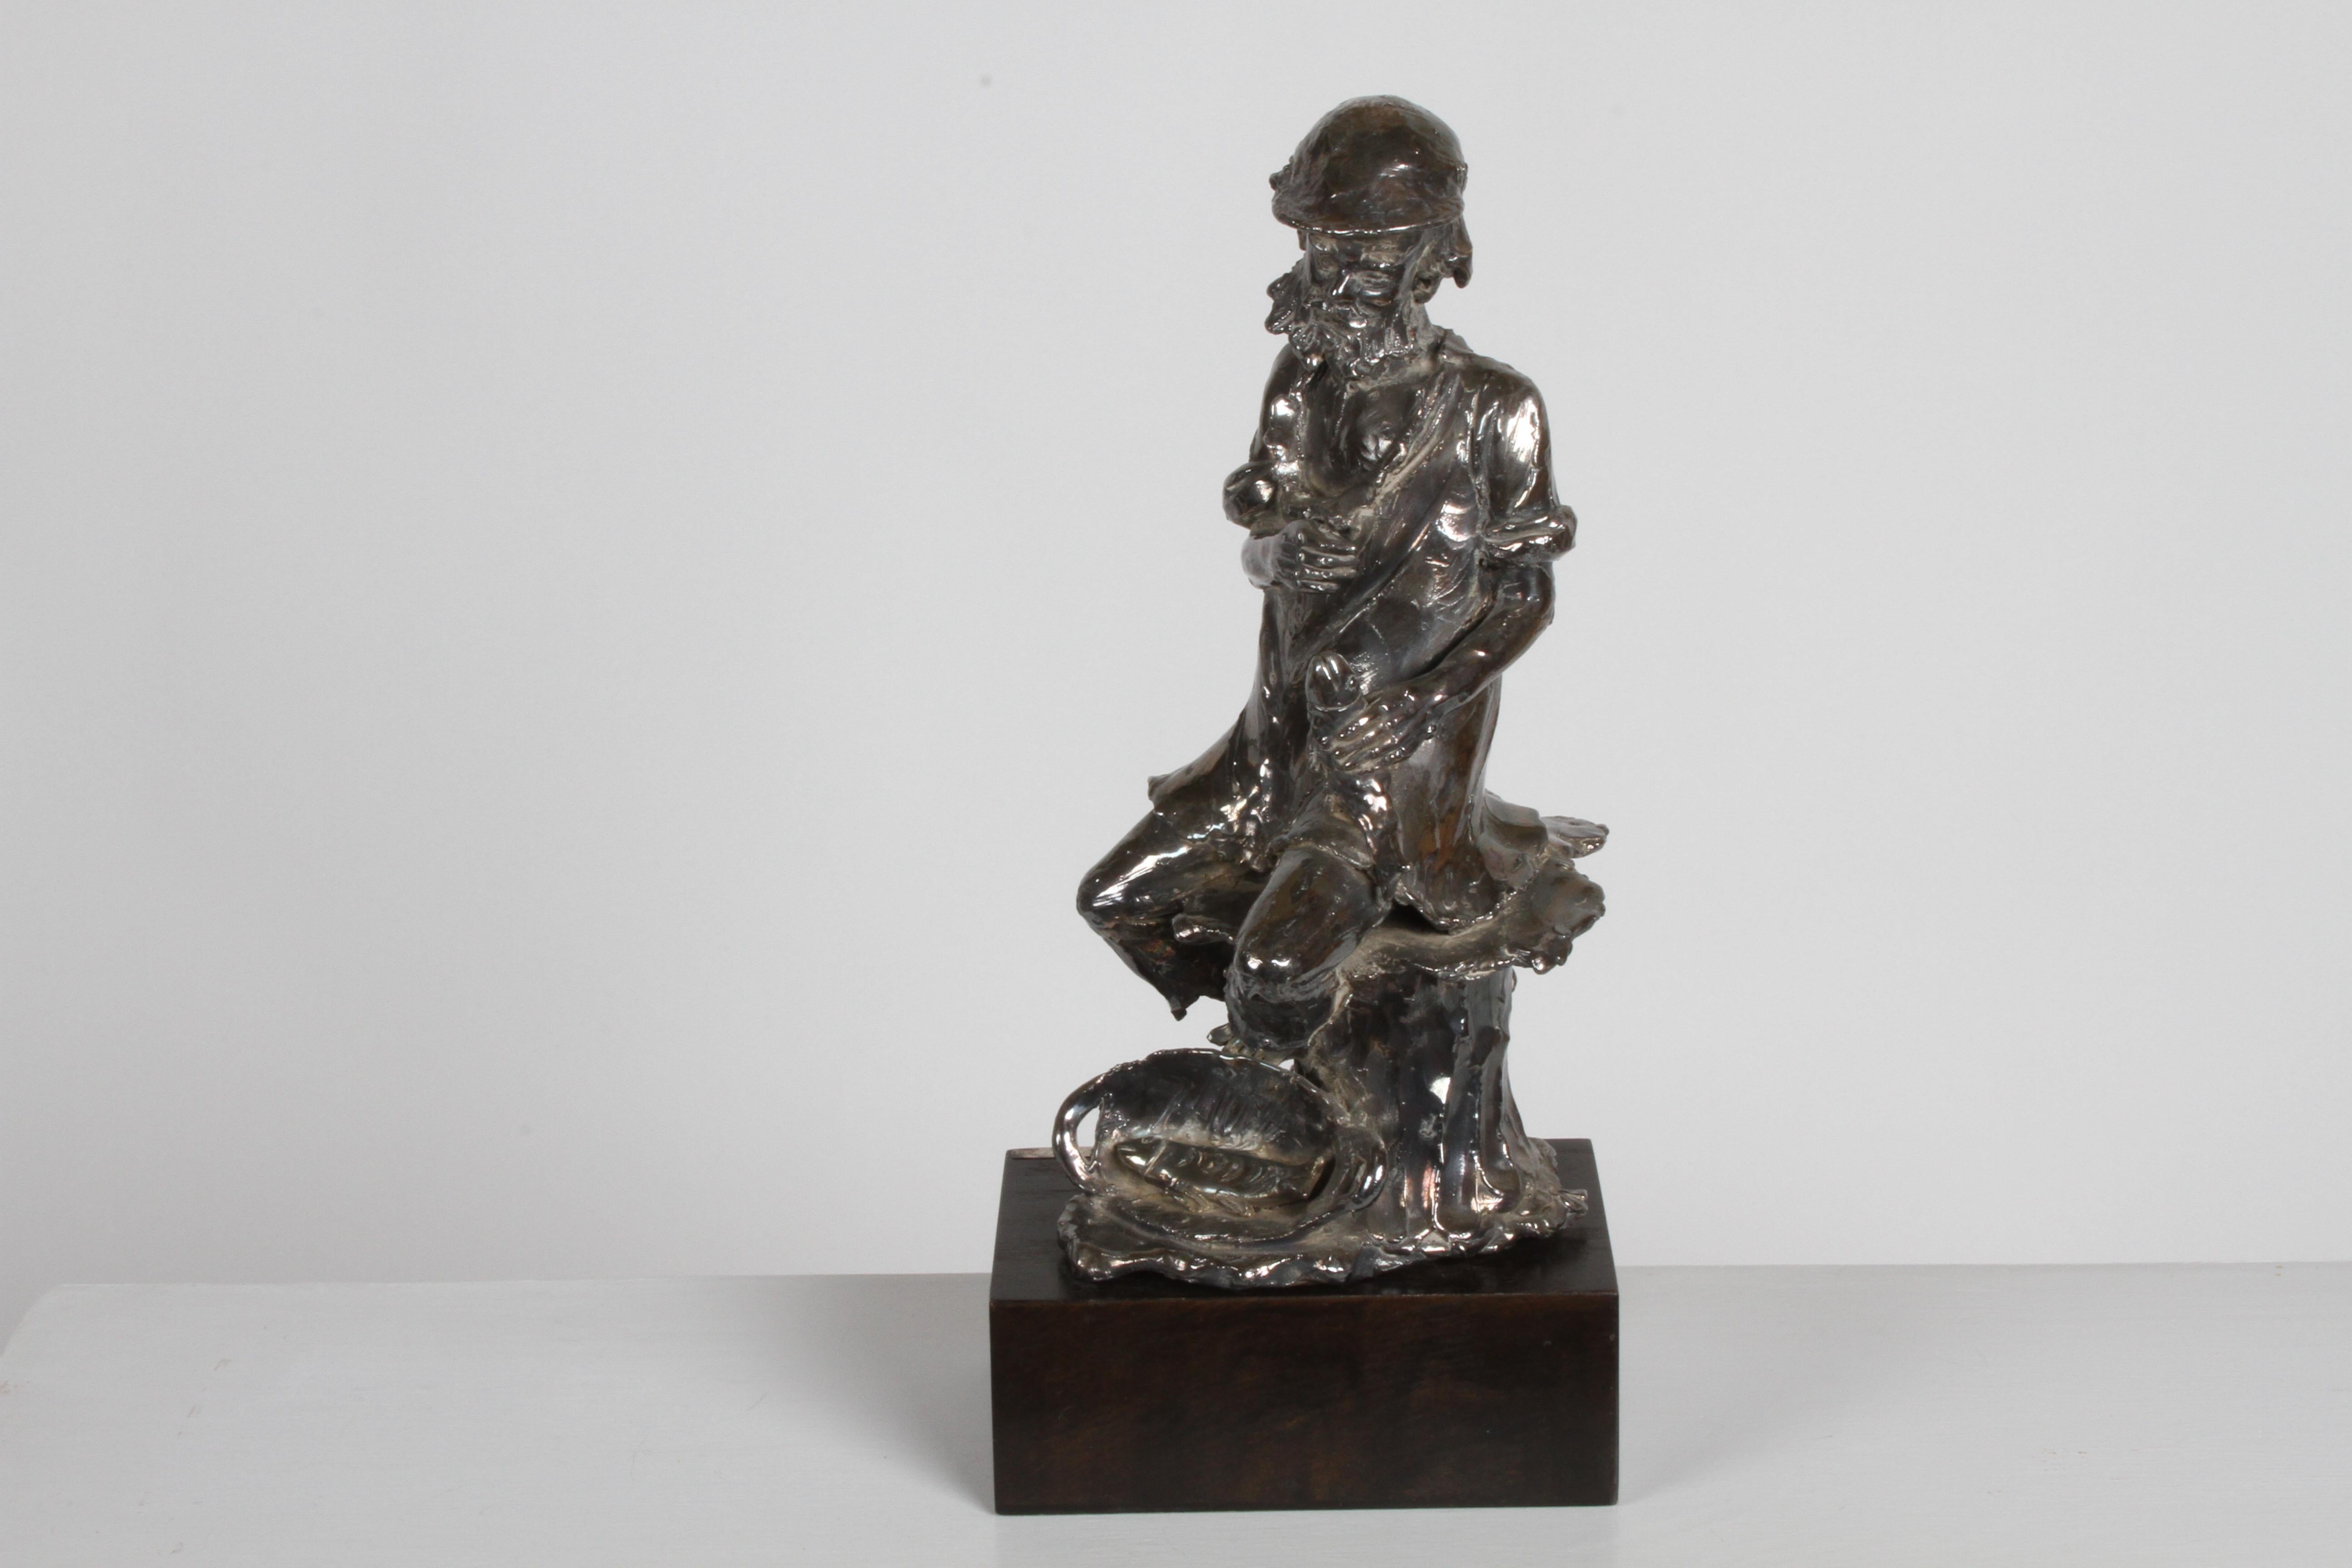 A well-known Canadian sculptor, Alice Winant (nee Czitron) Quebec, Canada/ Romania 1928-1989, unique sterling 925 sculpture of an old bearded fisherman sitting on a stump, holding a fish. Hand signed sterling plaque on wood base A. Winant, back of